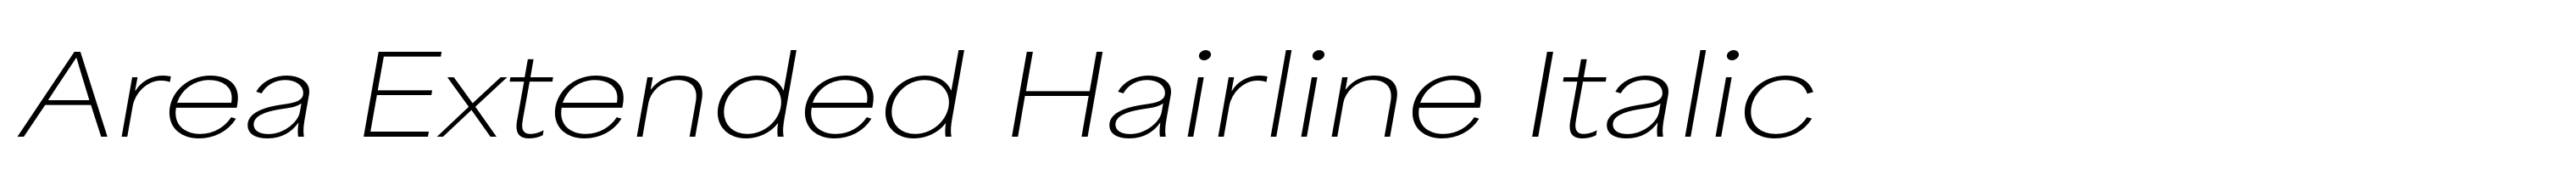 Area Extended Hairline Italic